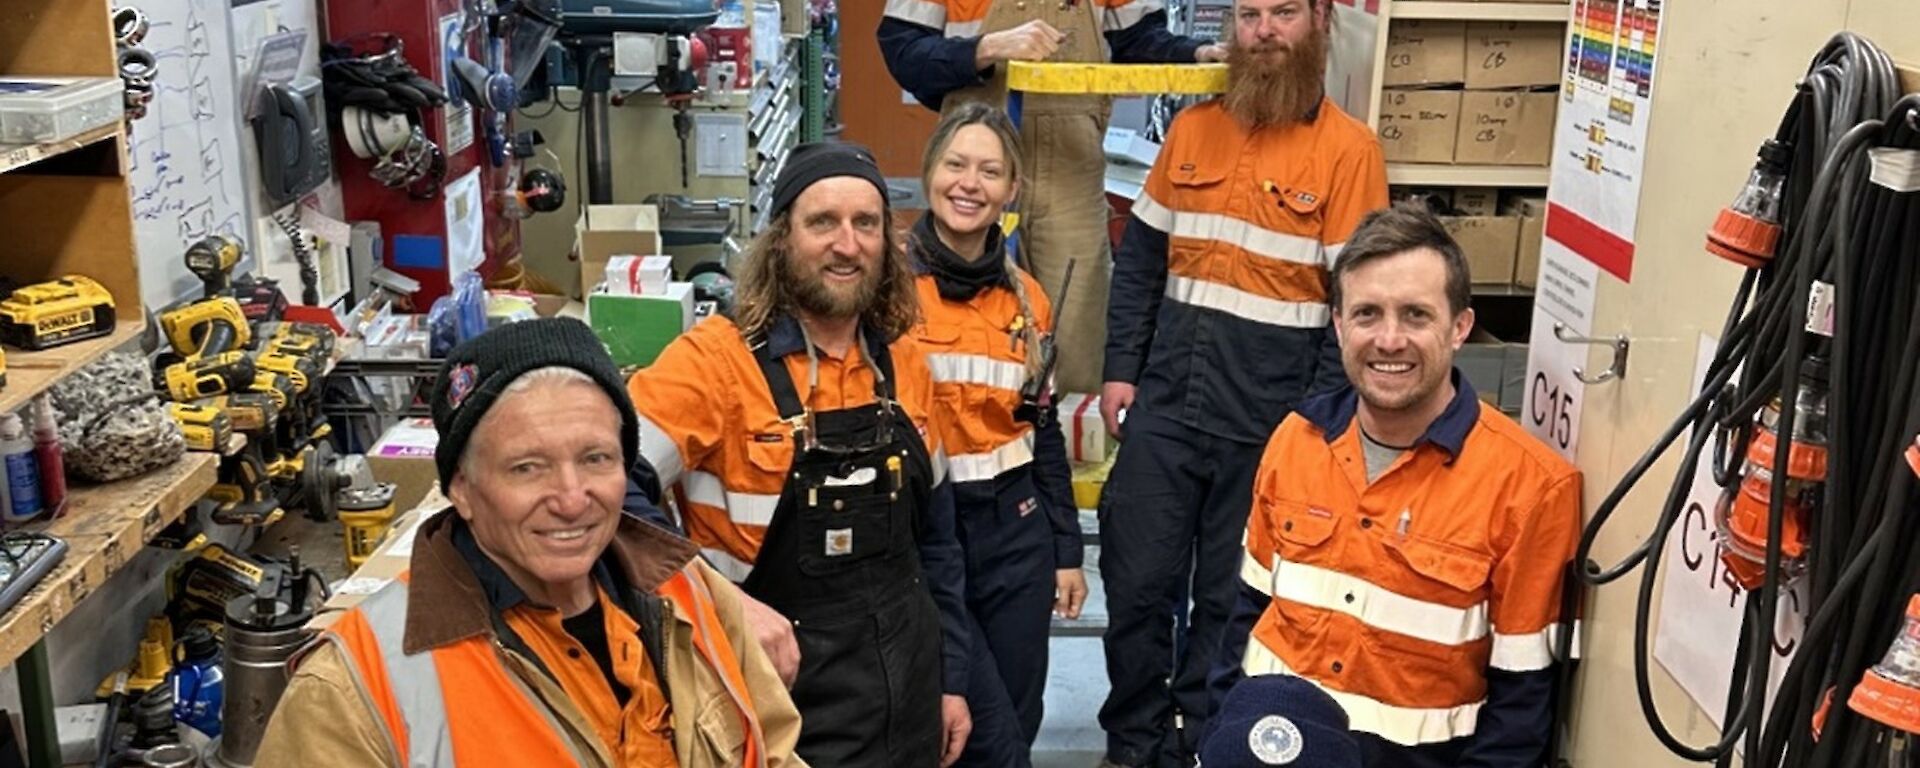 Seven Casey station electricians pose for a photo in workshop